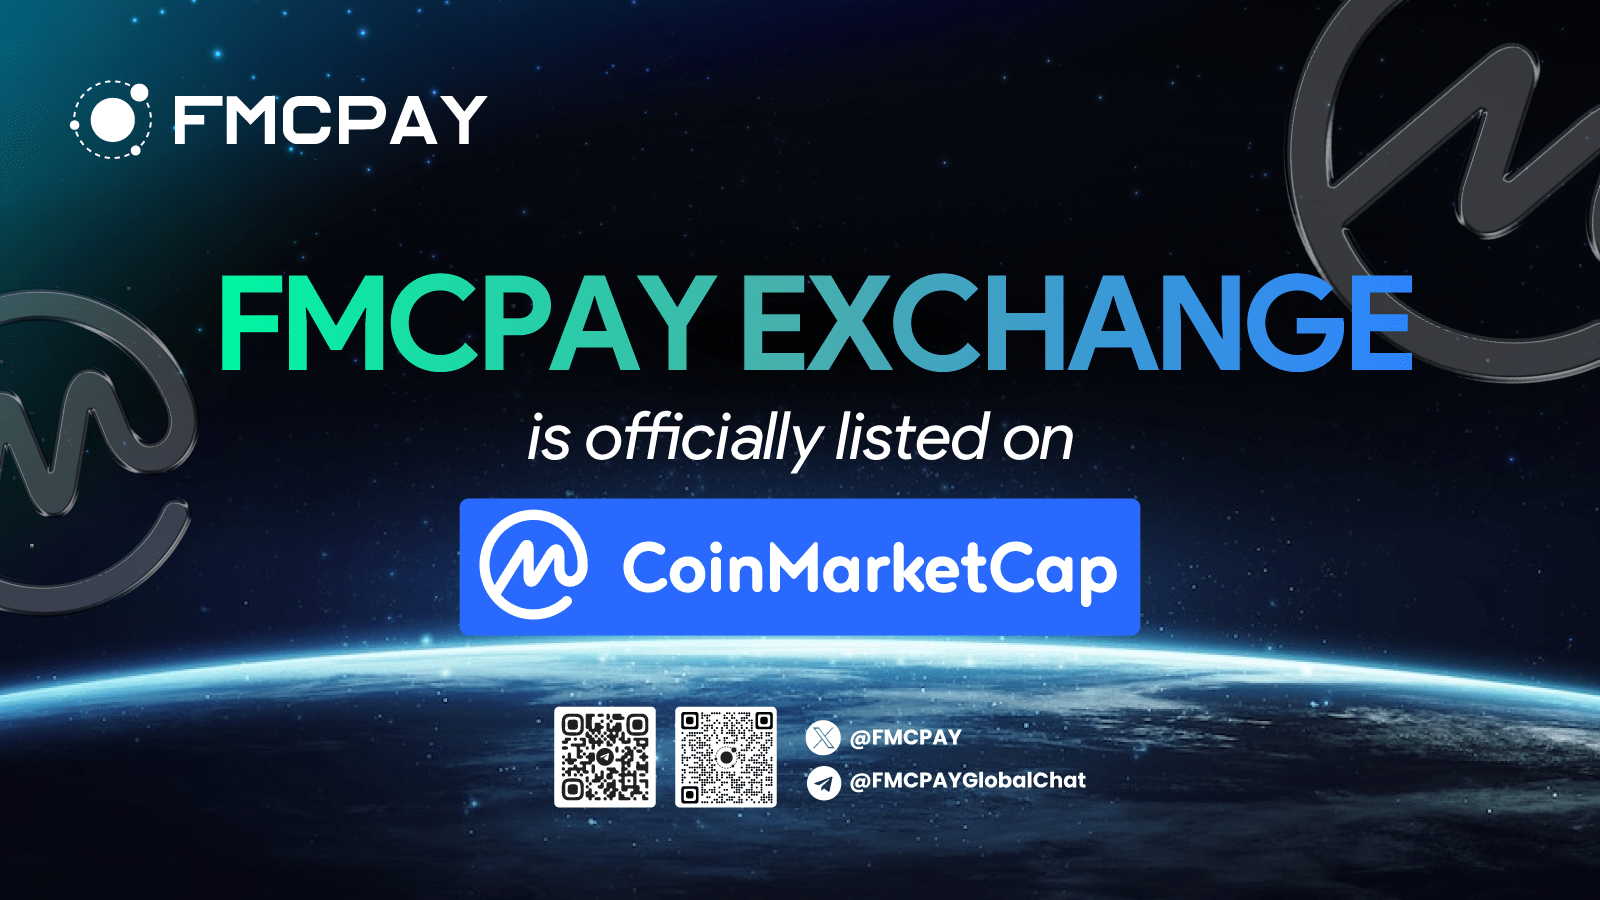 fmcpay exchange officially listed on coinmarketcap